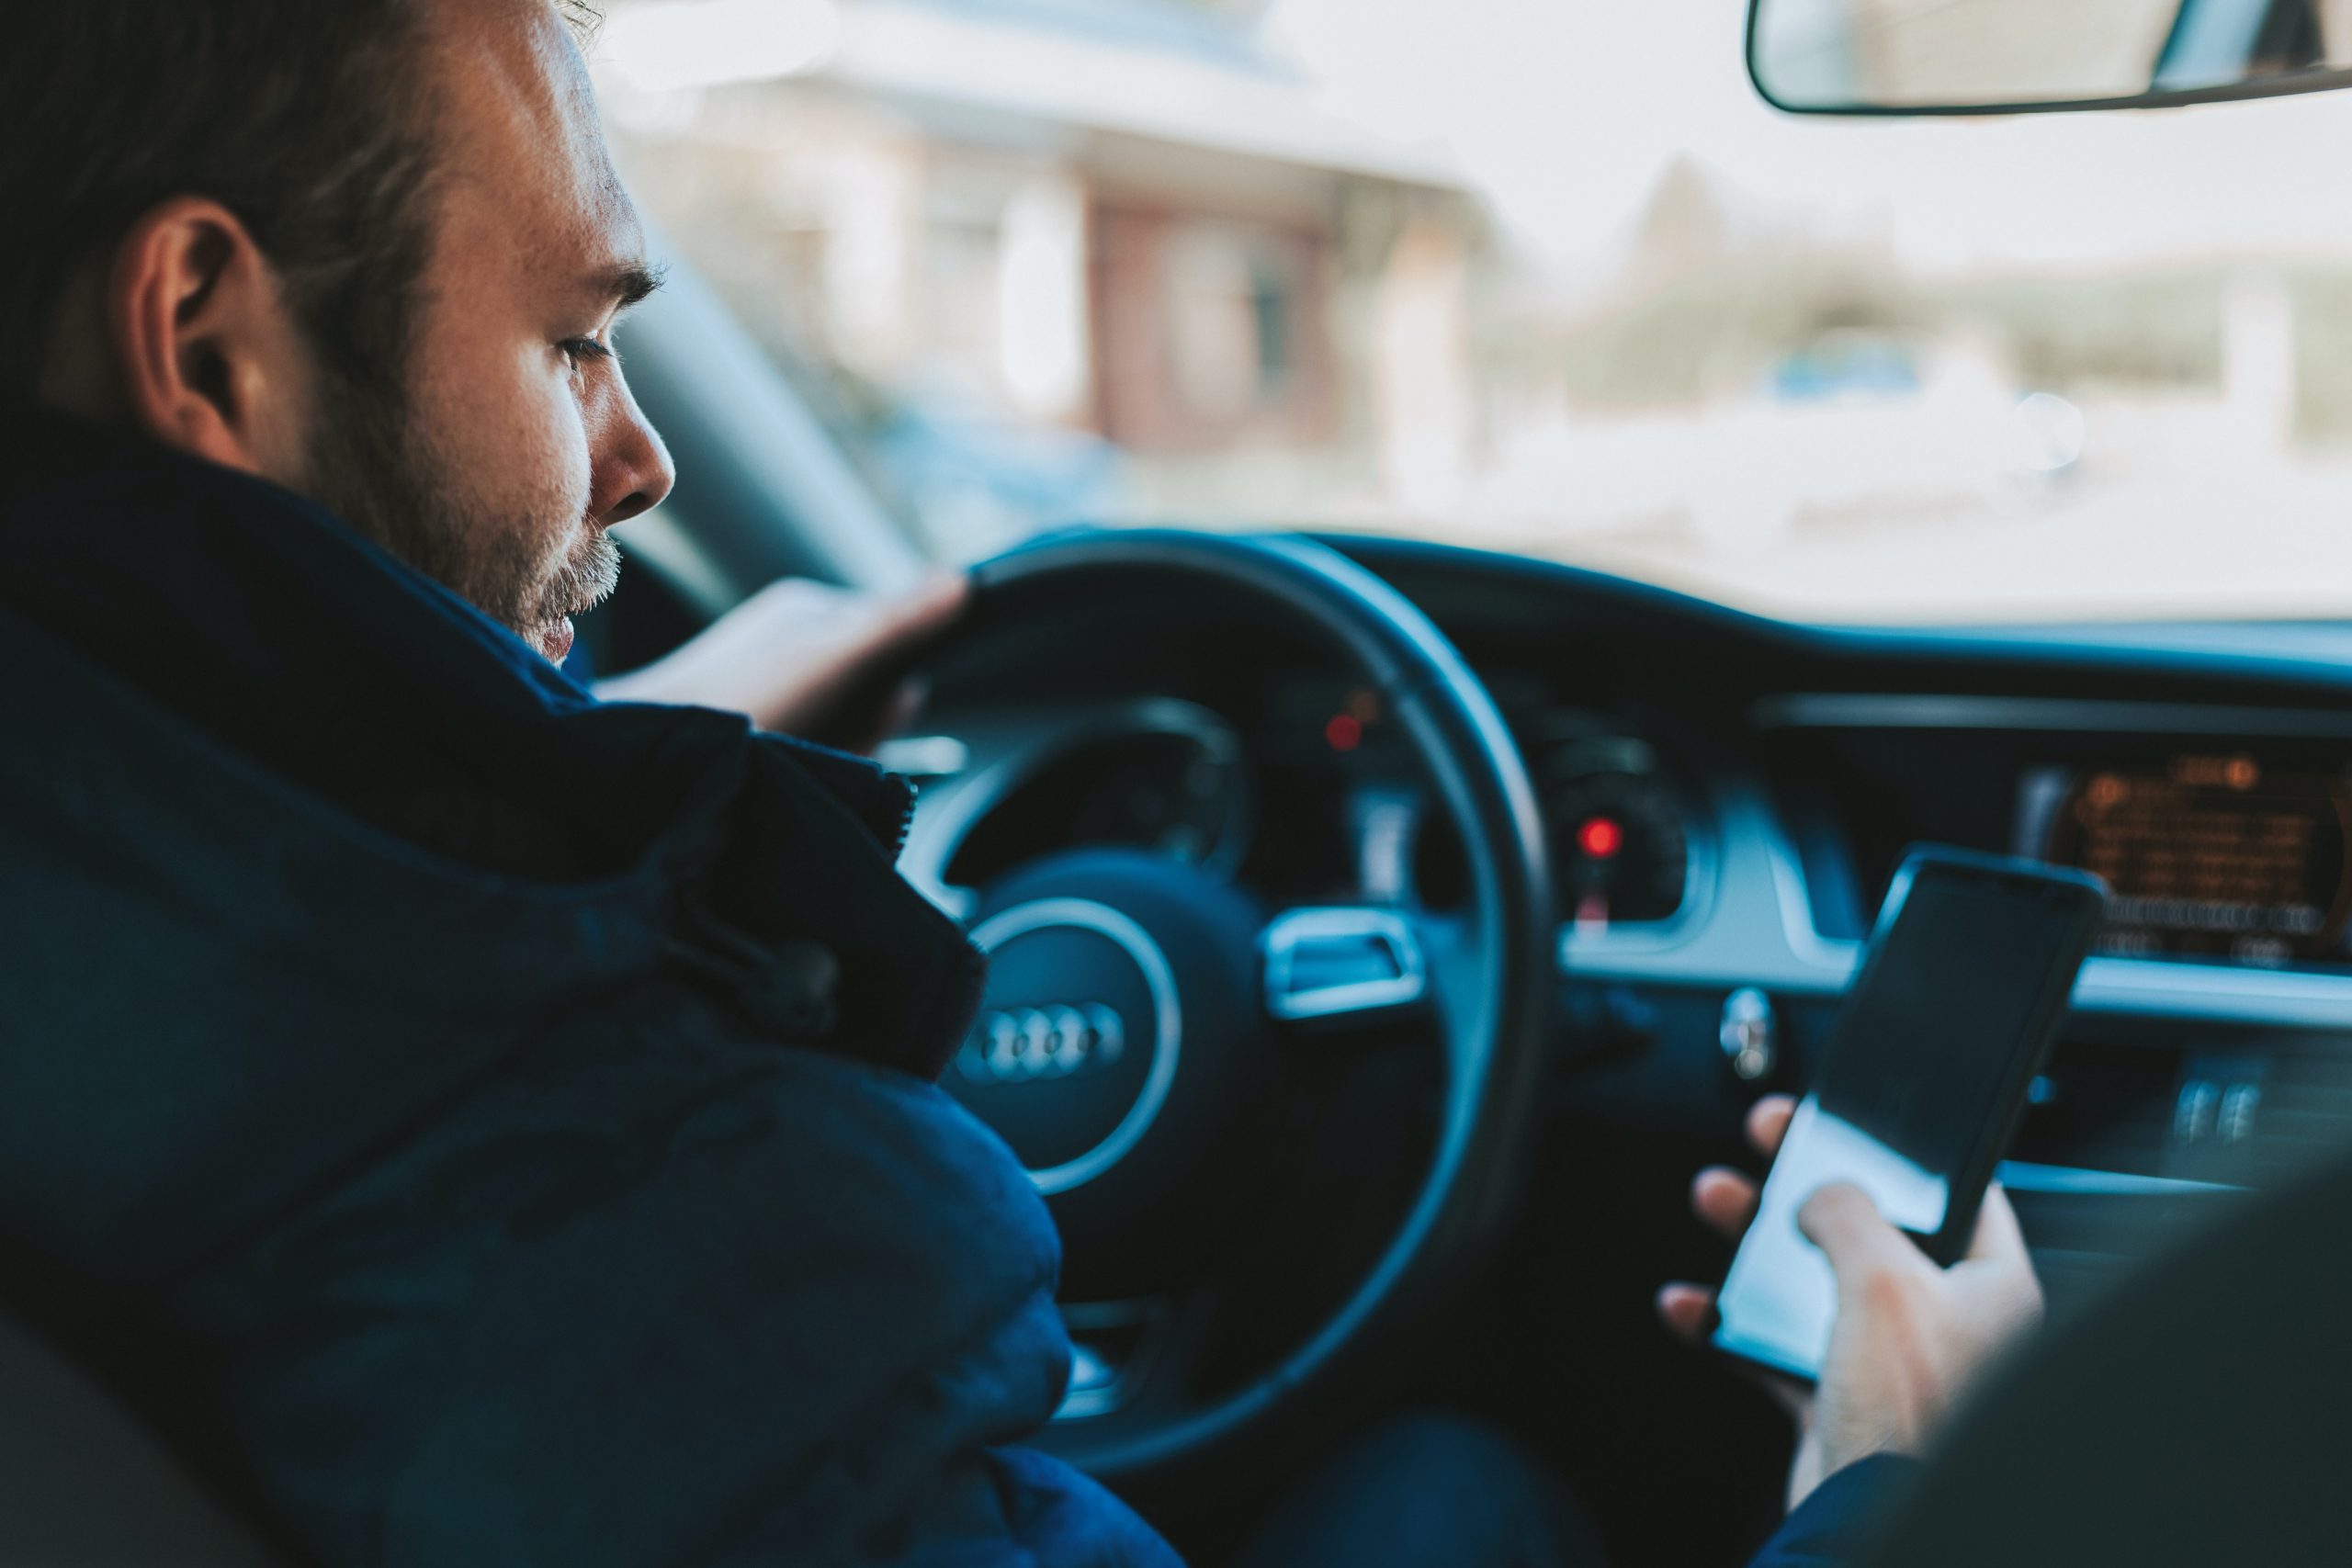 Man Driving Audi Distracted by Looking at Phone